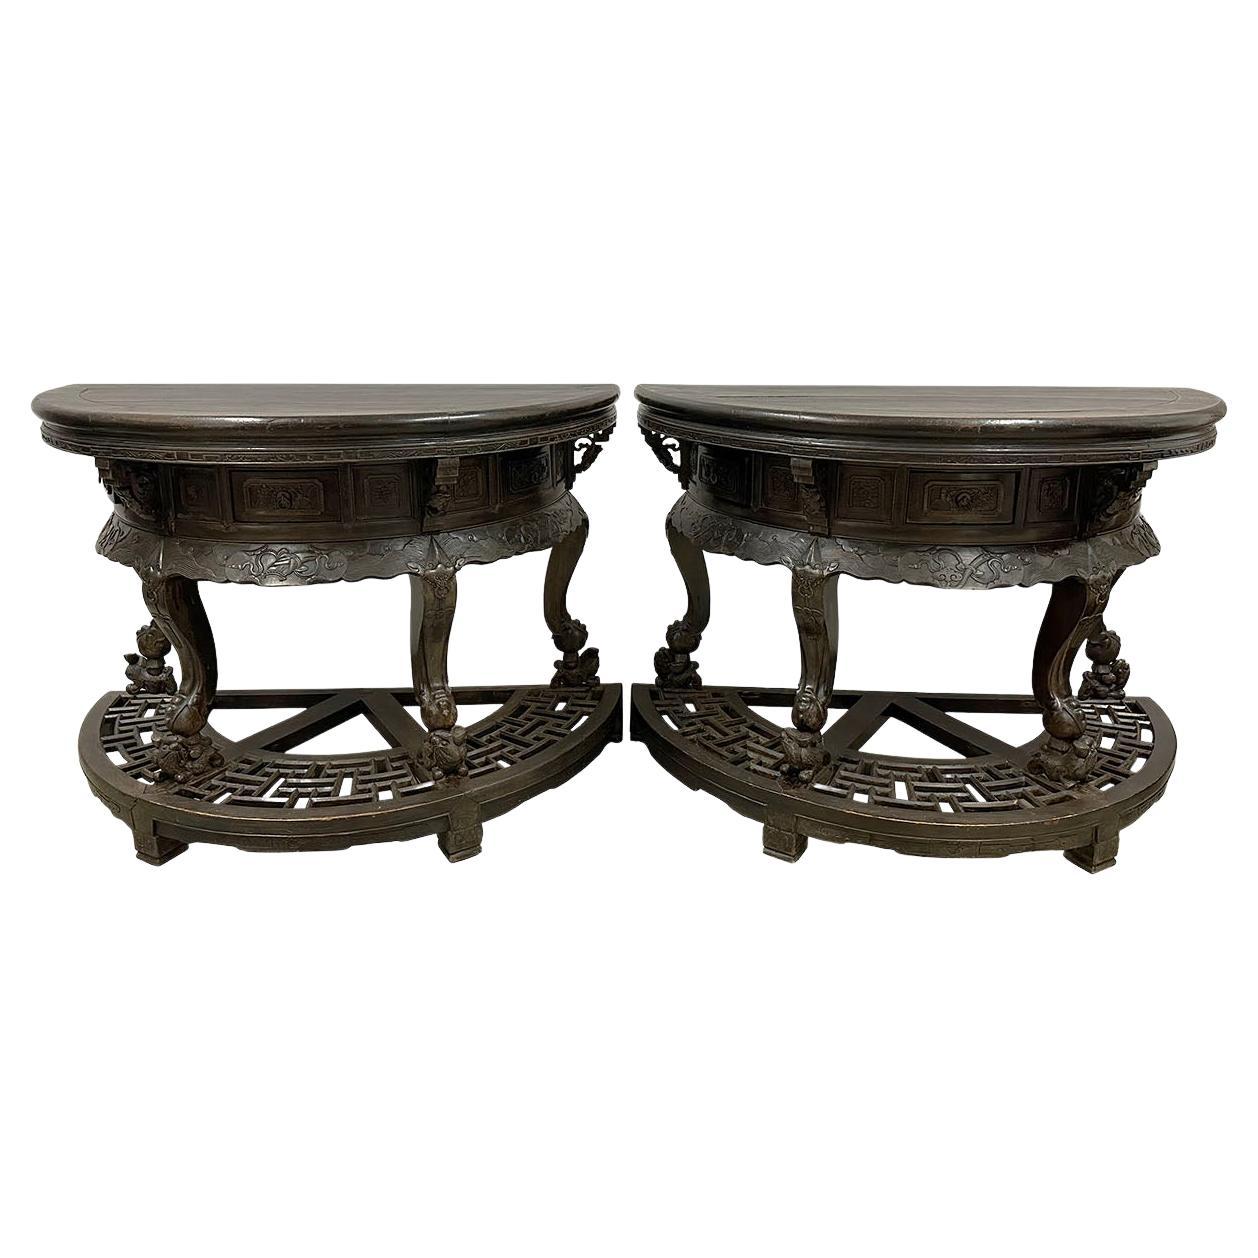 19th Century Antique Chinese Hand Carved Half Moon Tables, Set of 2